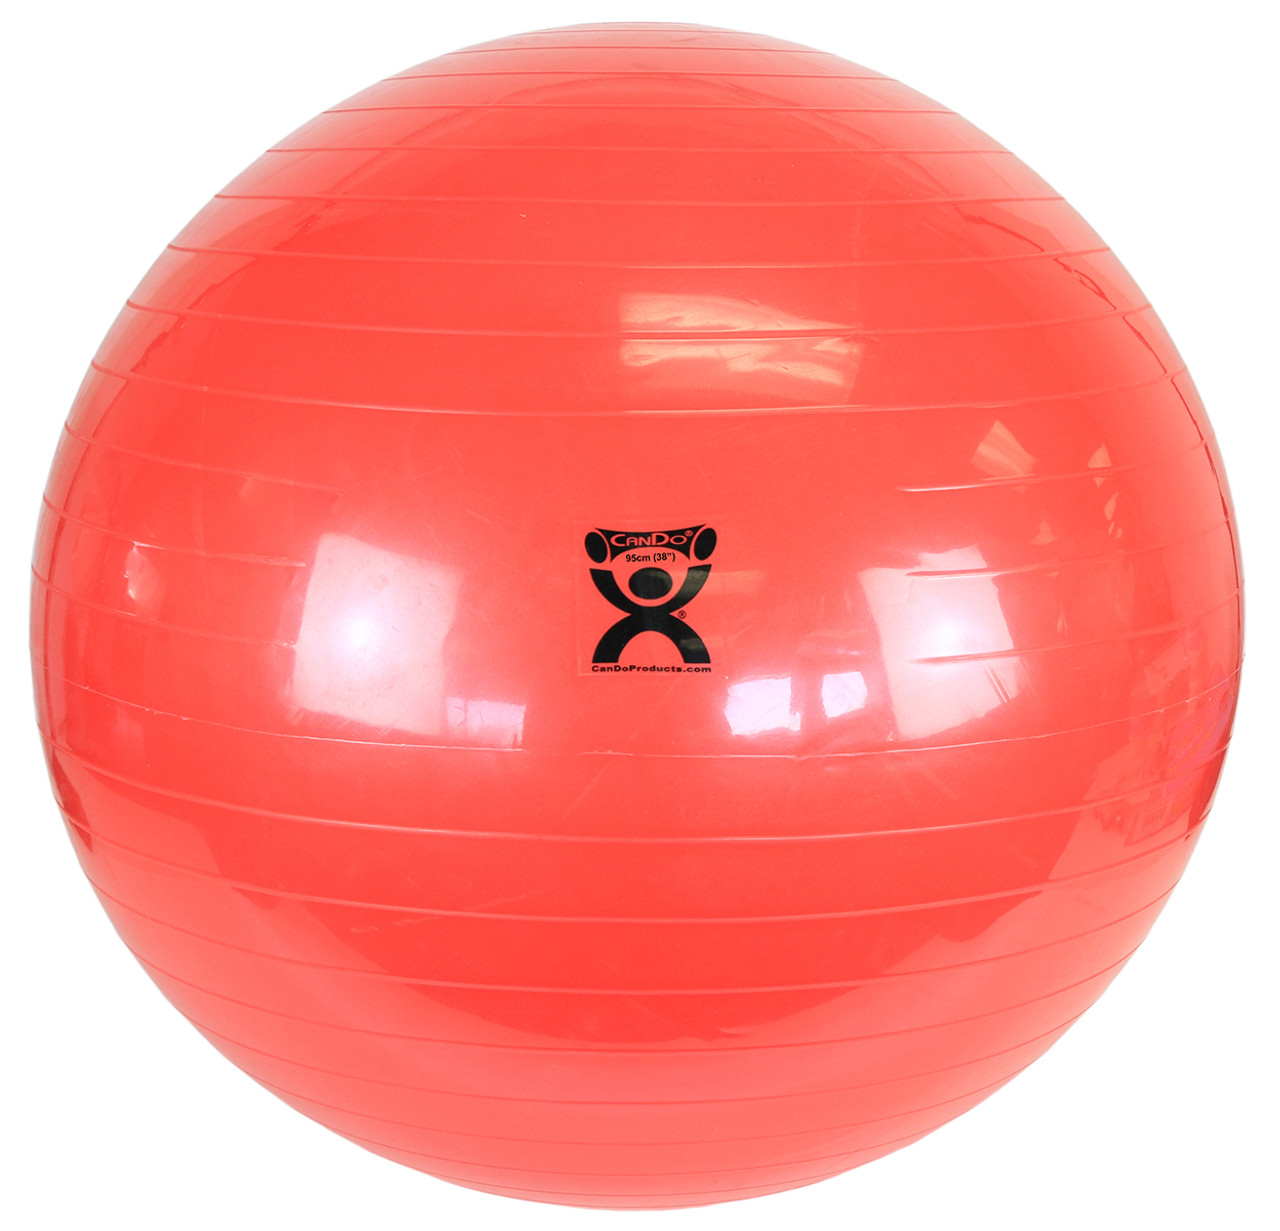 CanDo¨ Inflatable Exercise Ball - Red - 38" (95 cm)